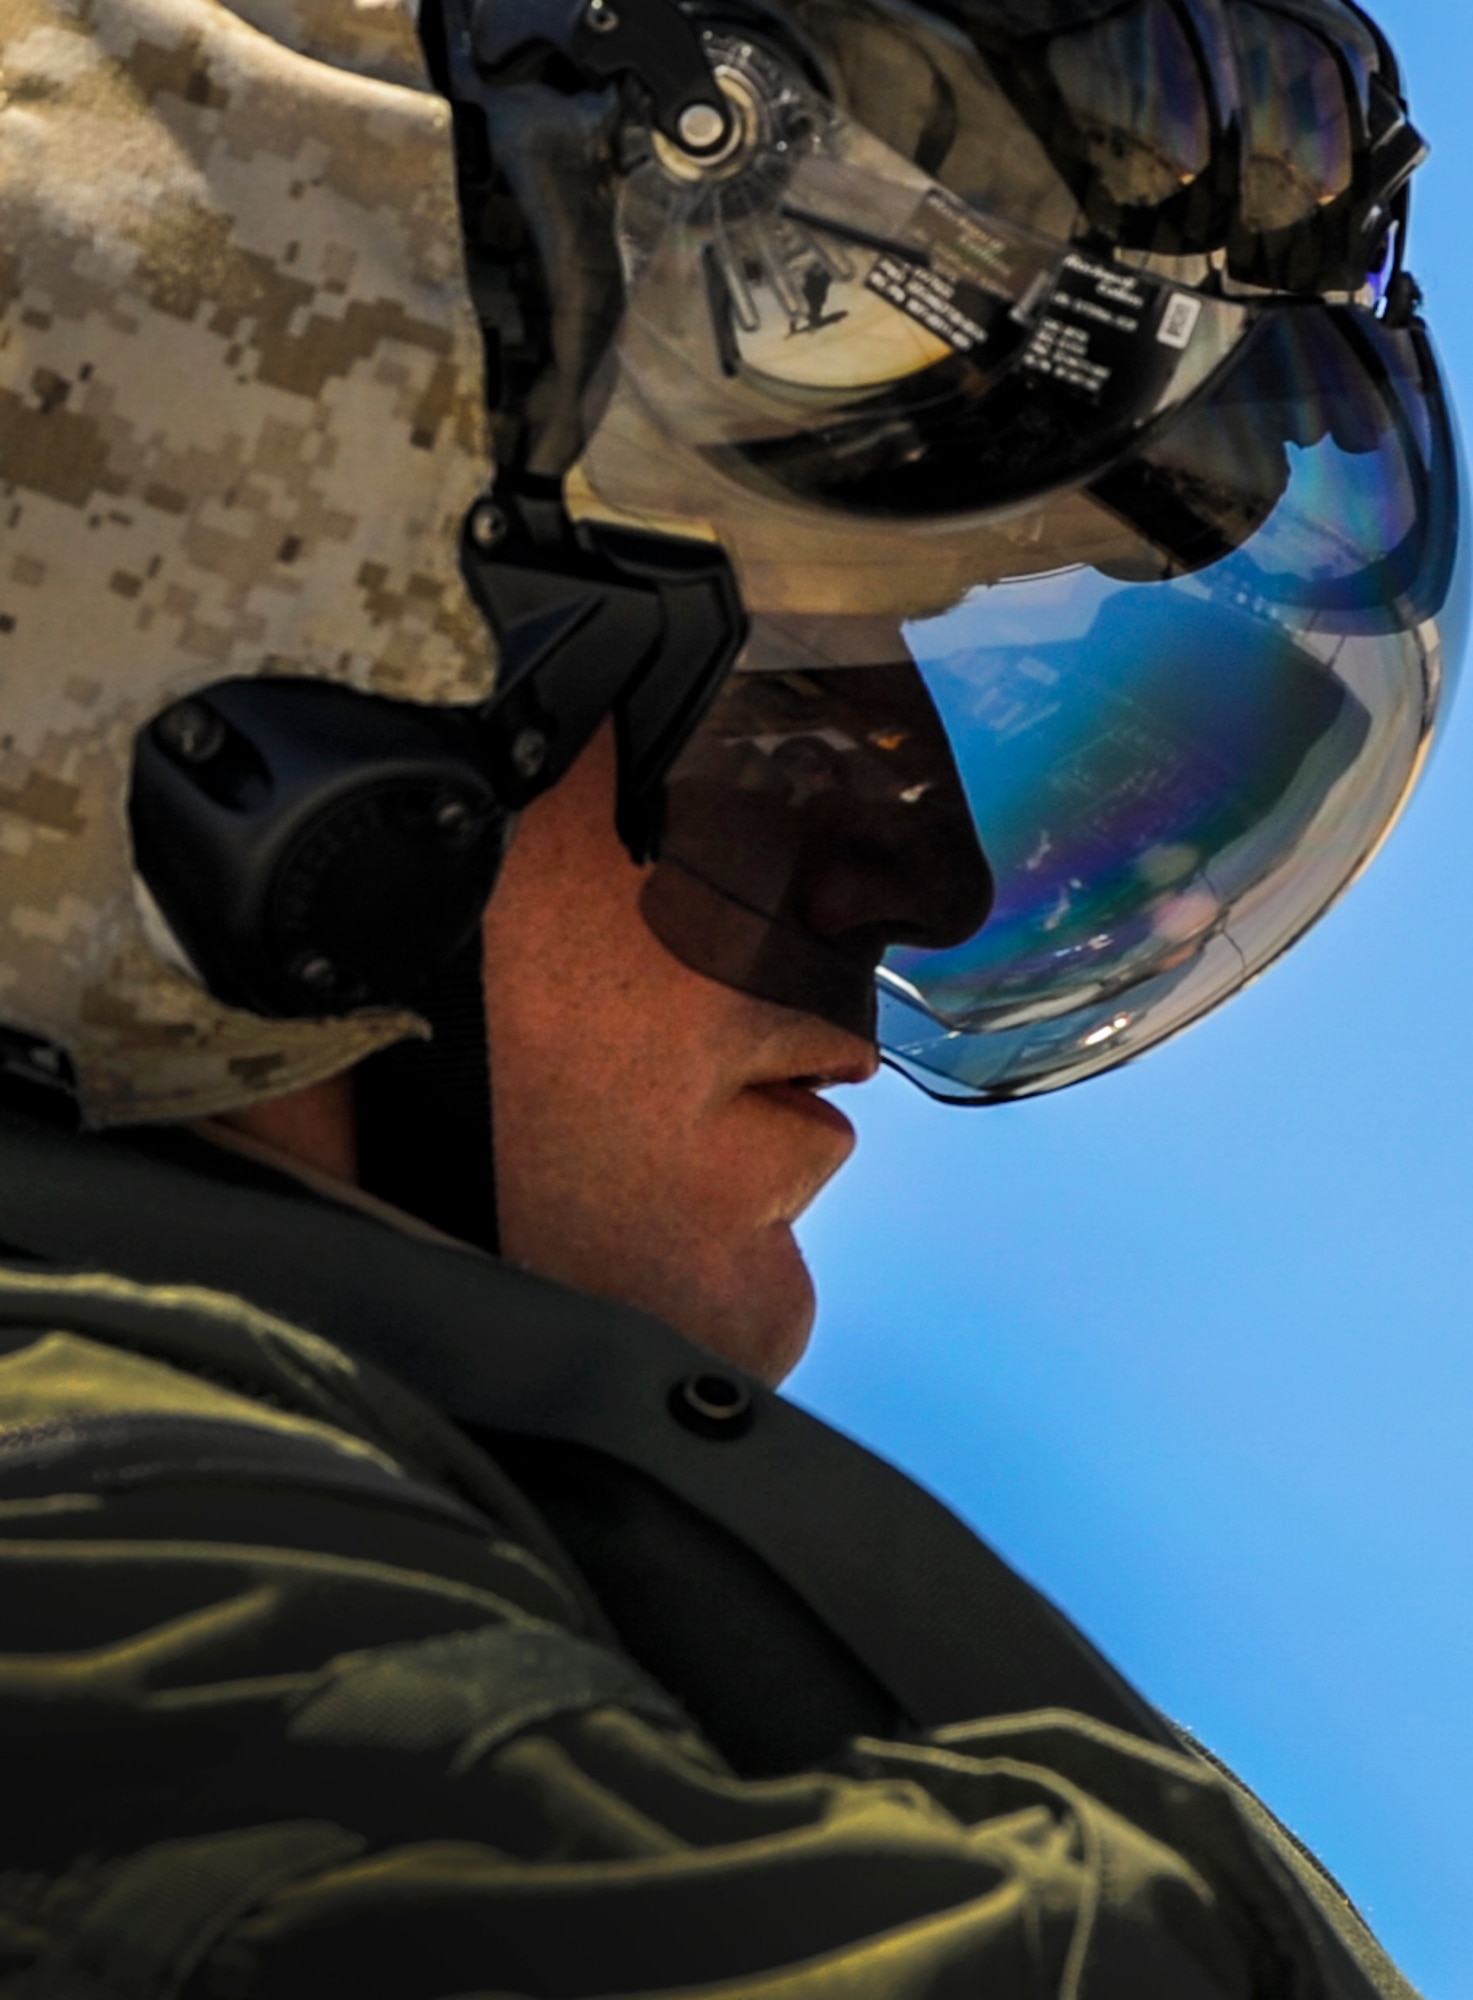 A Marine F-35B pilot, assigned to the 3rd Marine Aircraft Wing, Marine Corps Air Station Yuma, Az., prepares to take off during Red Flag 16-3 at Nellis Air Force Base, Nev., July 12, 2016. Red Flag provides combat training in a degraded and operationally limited environment making the training mission as realistic as possible. (U.S. Air Force photo by Airman 1st Class Kevin Tanenbaum)